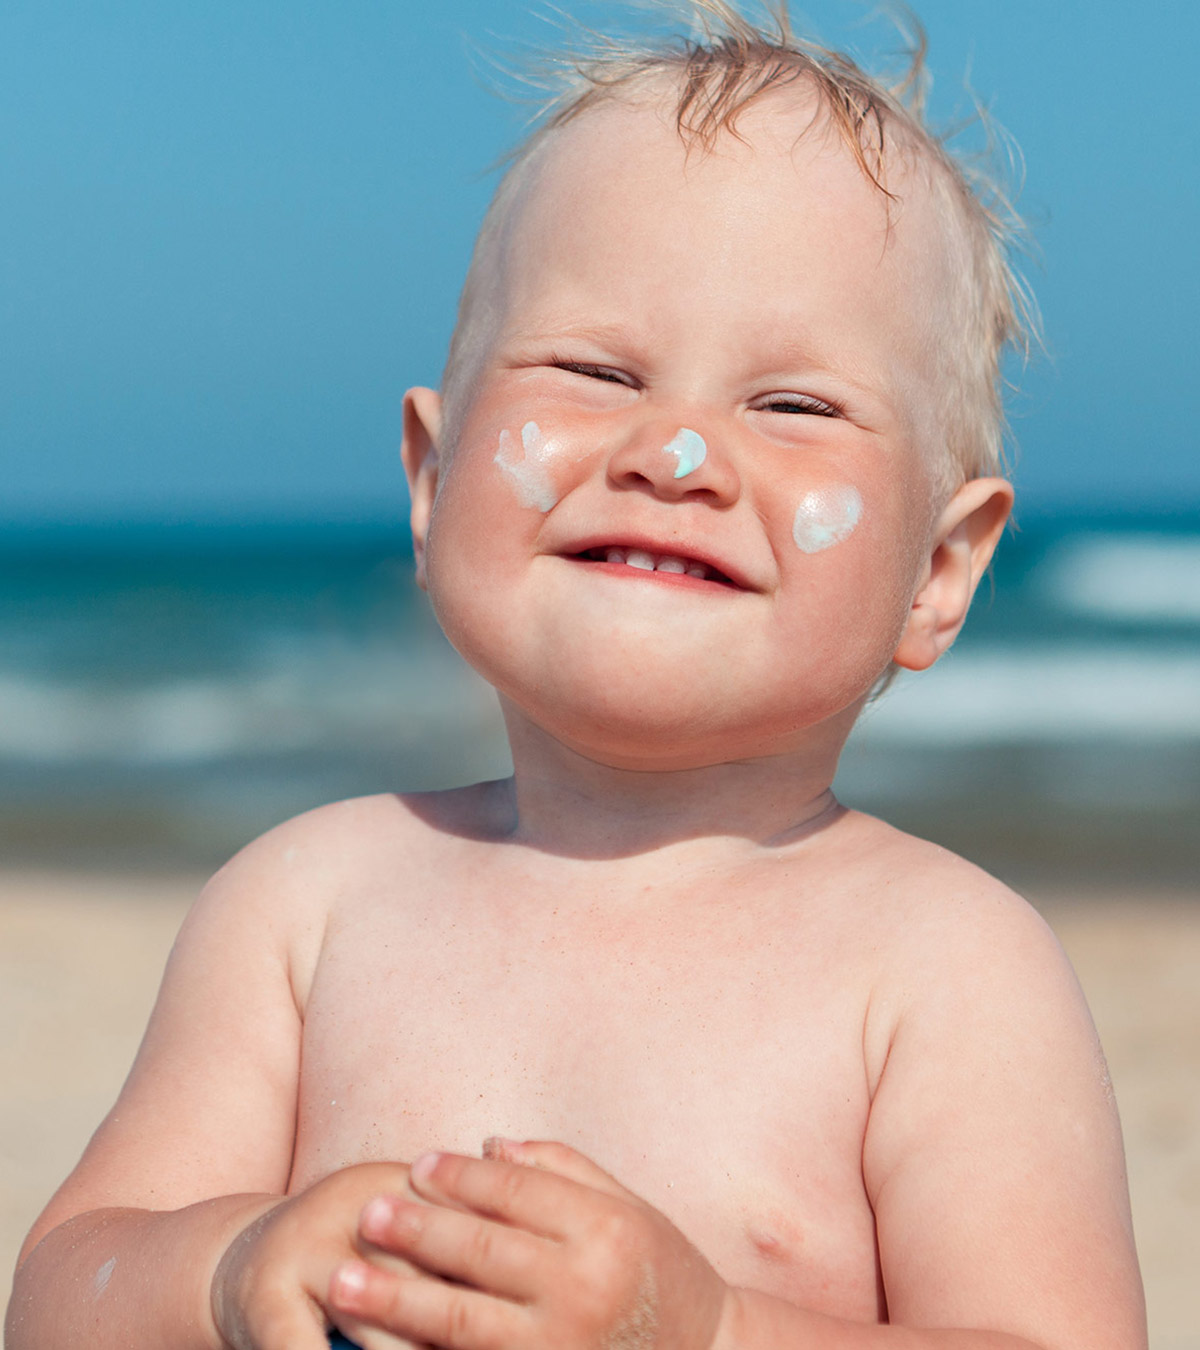 Sunburn In Babies: Causes, Treatment And Prevention